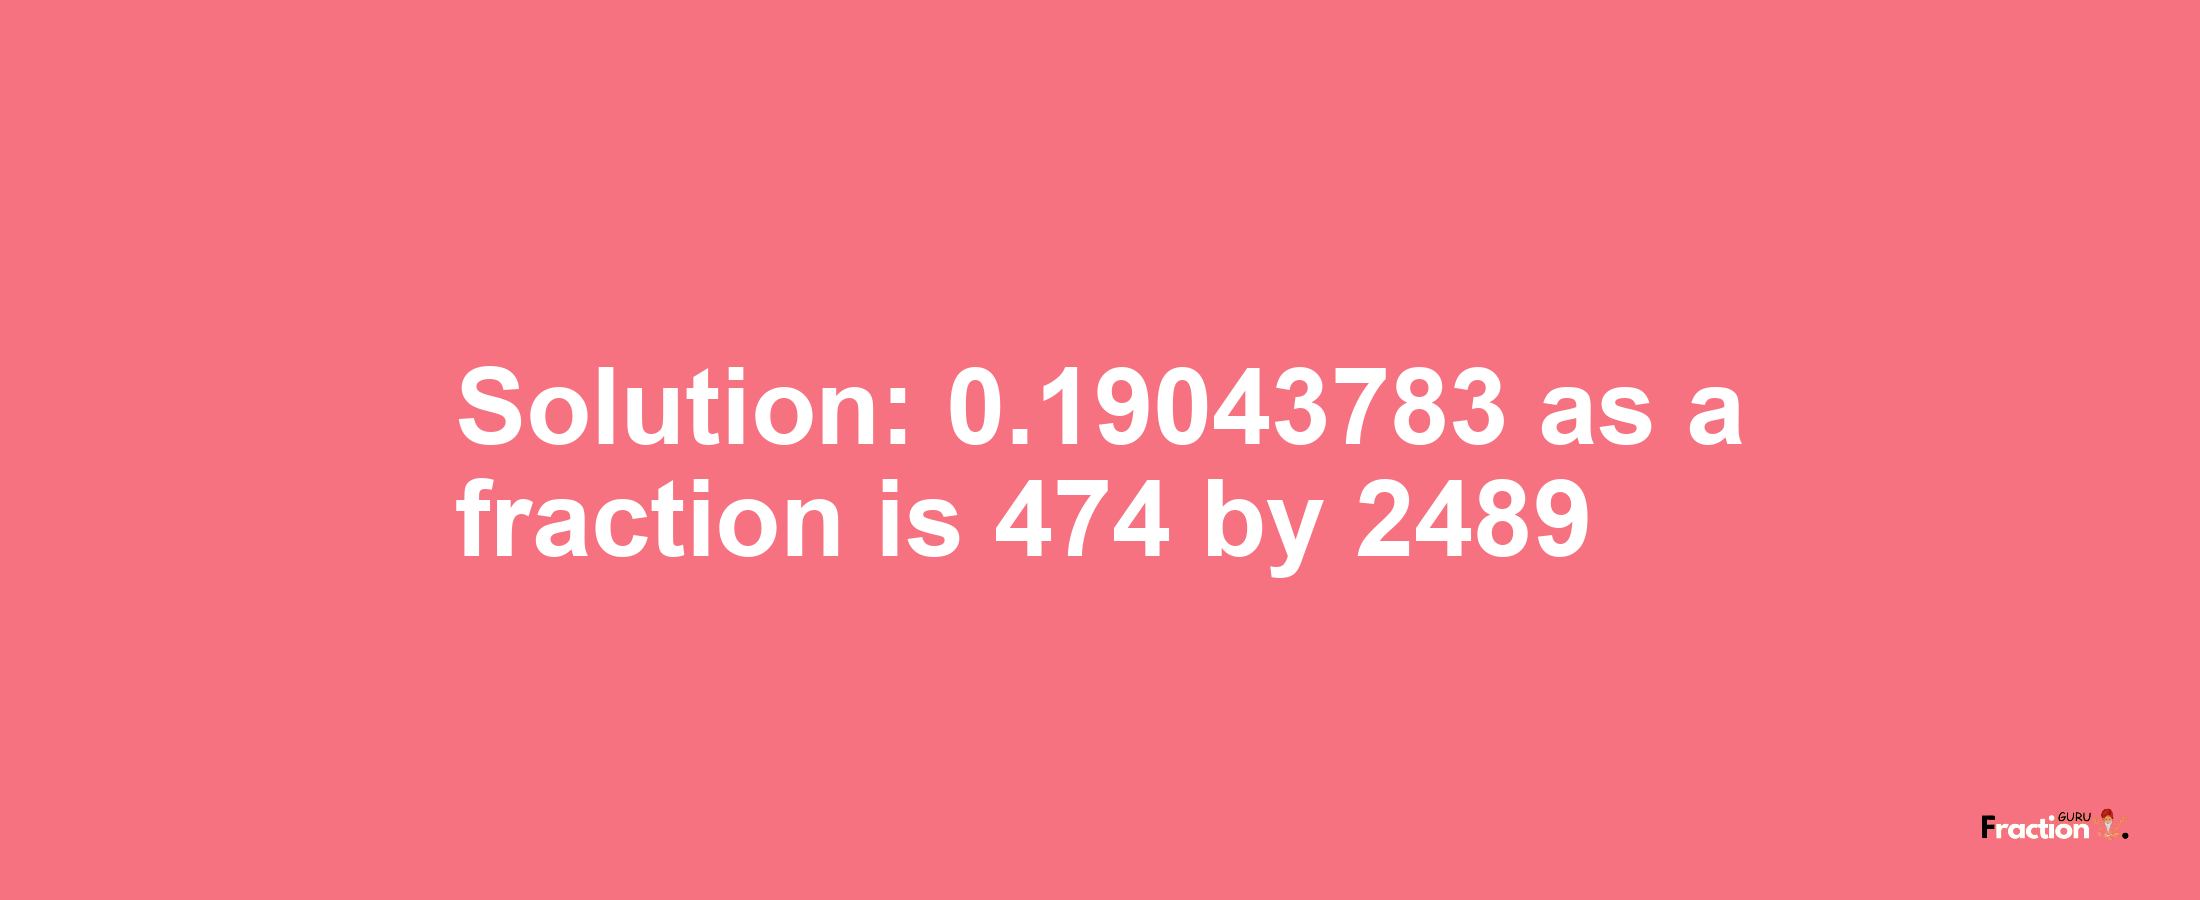 Solution:0.19043783 as a fraction is 474/2489